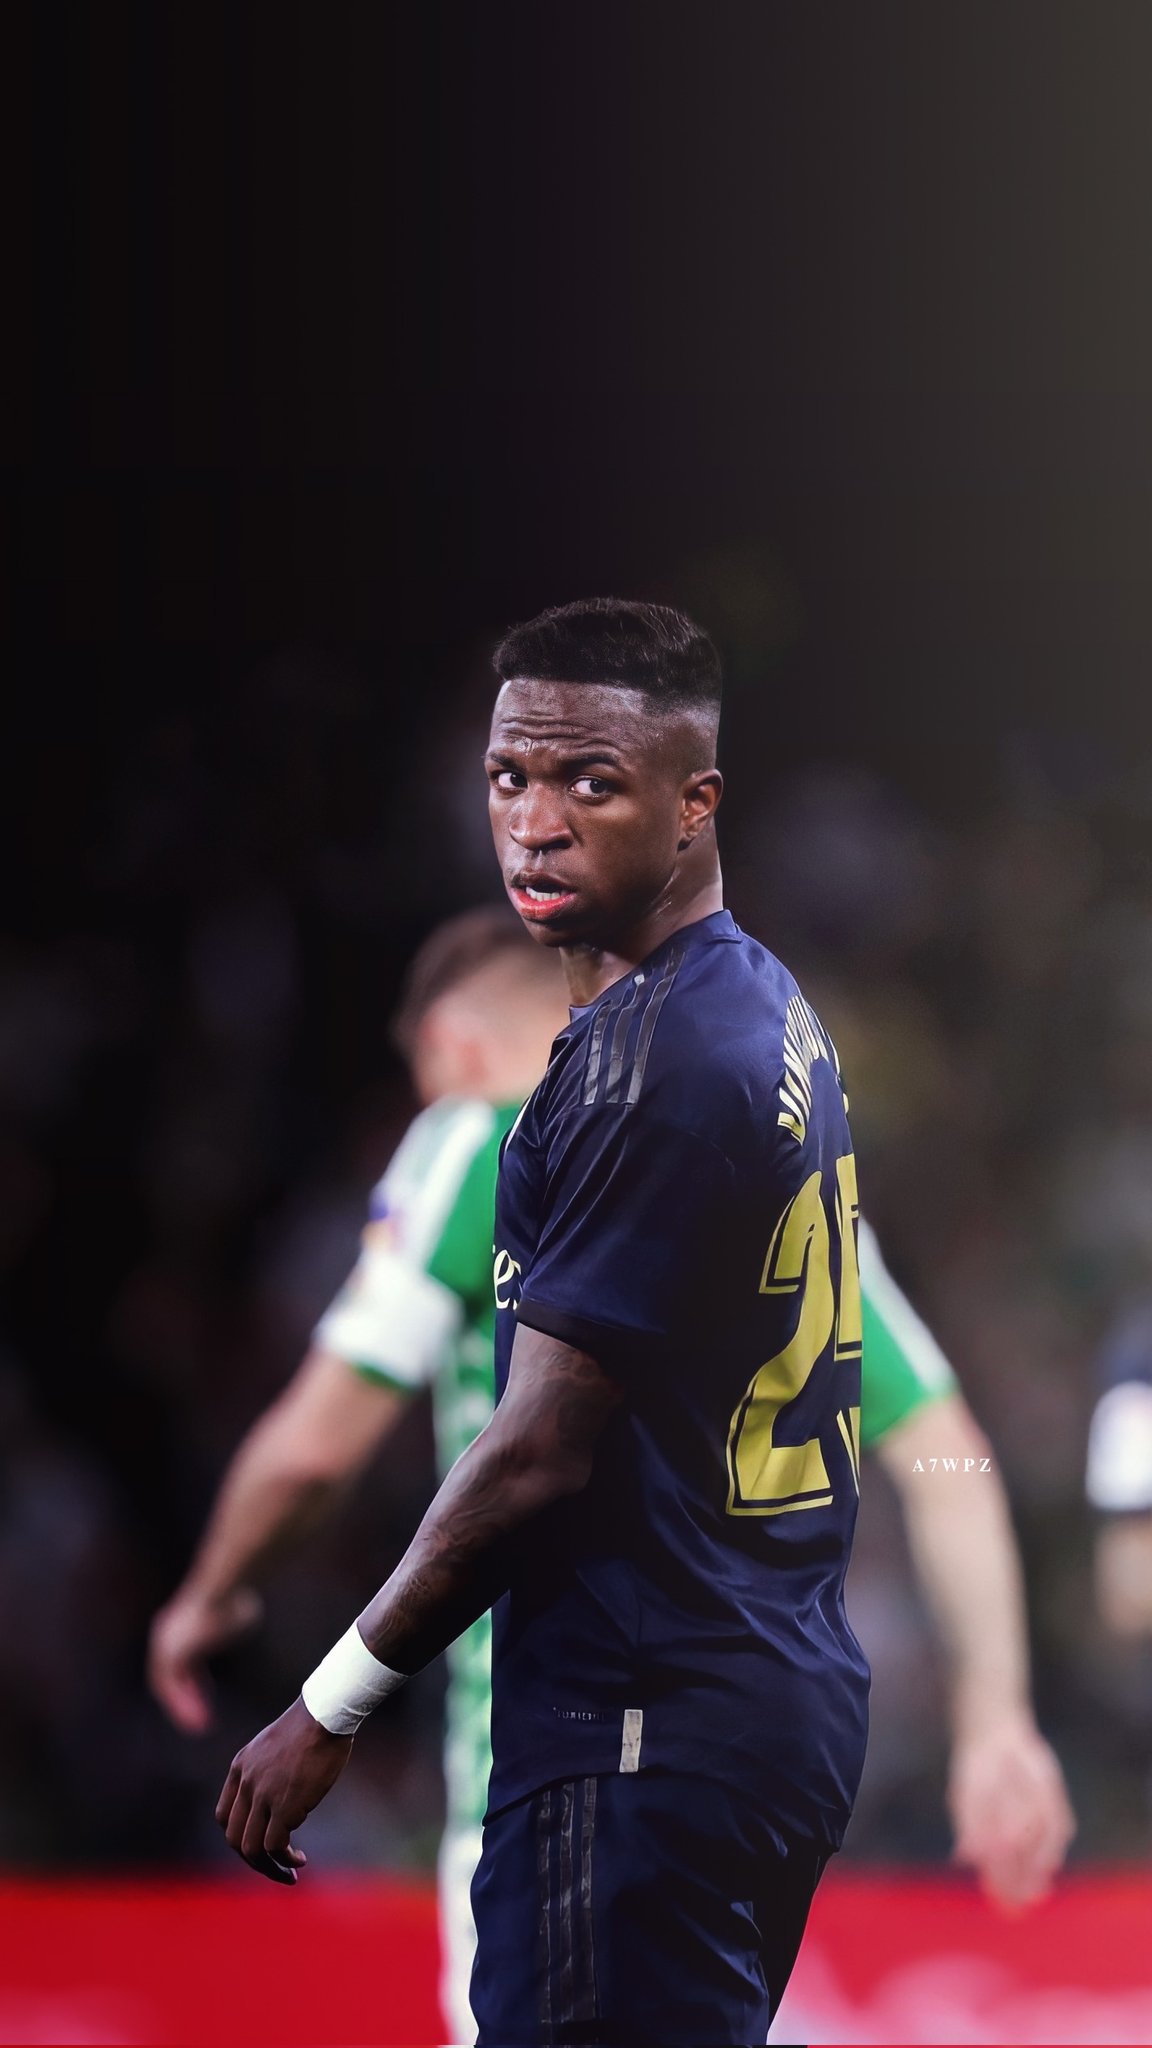 Vinicius Junior the young forward of Real Madrid HD wallpaper download